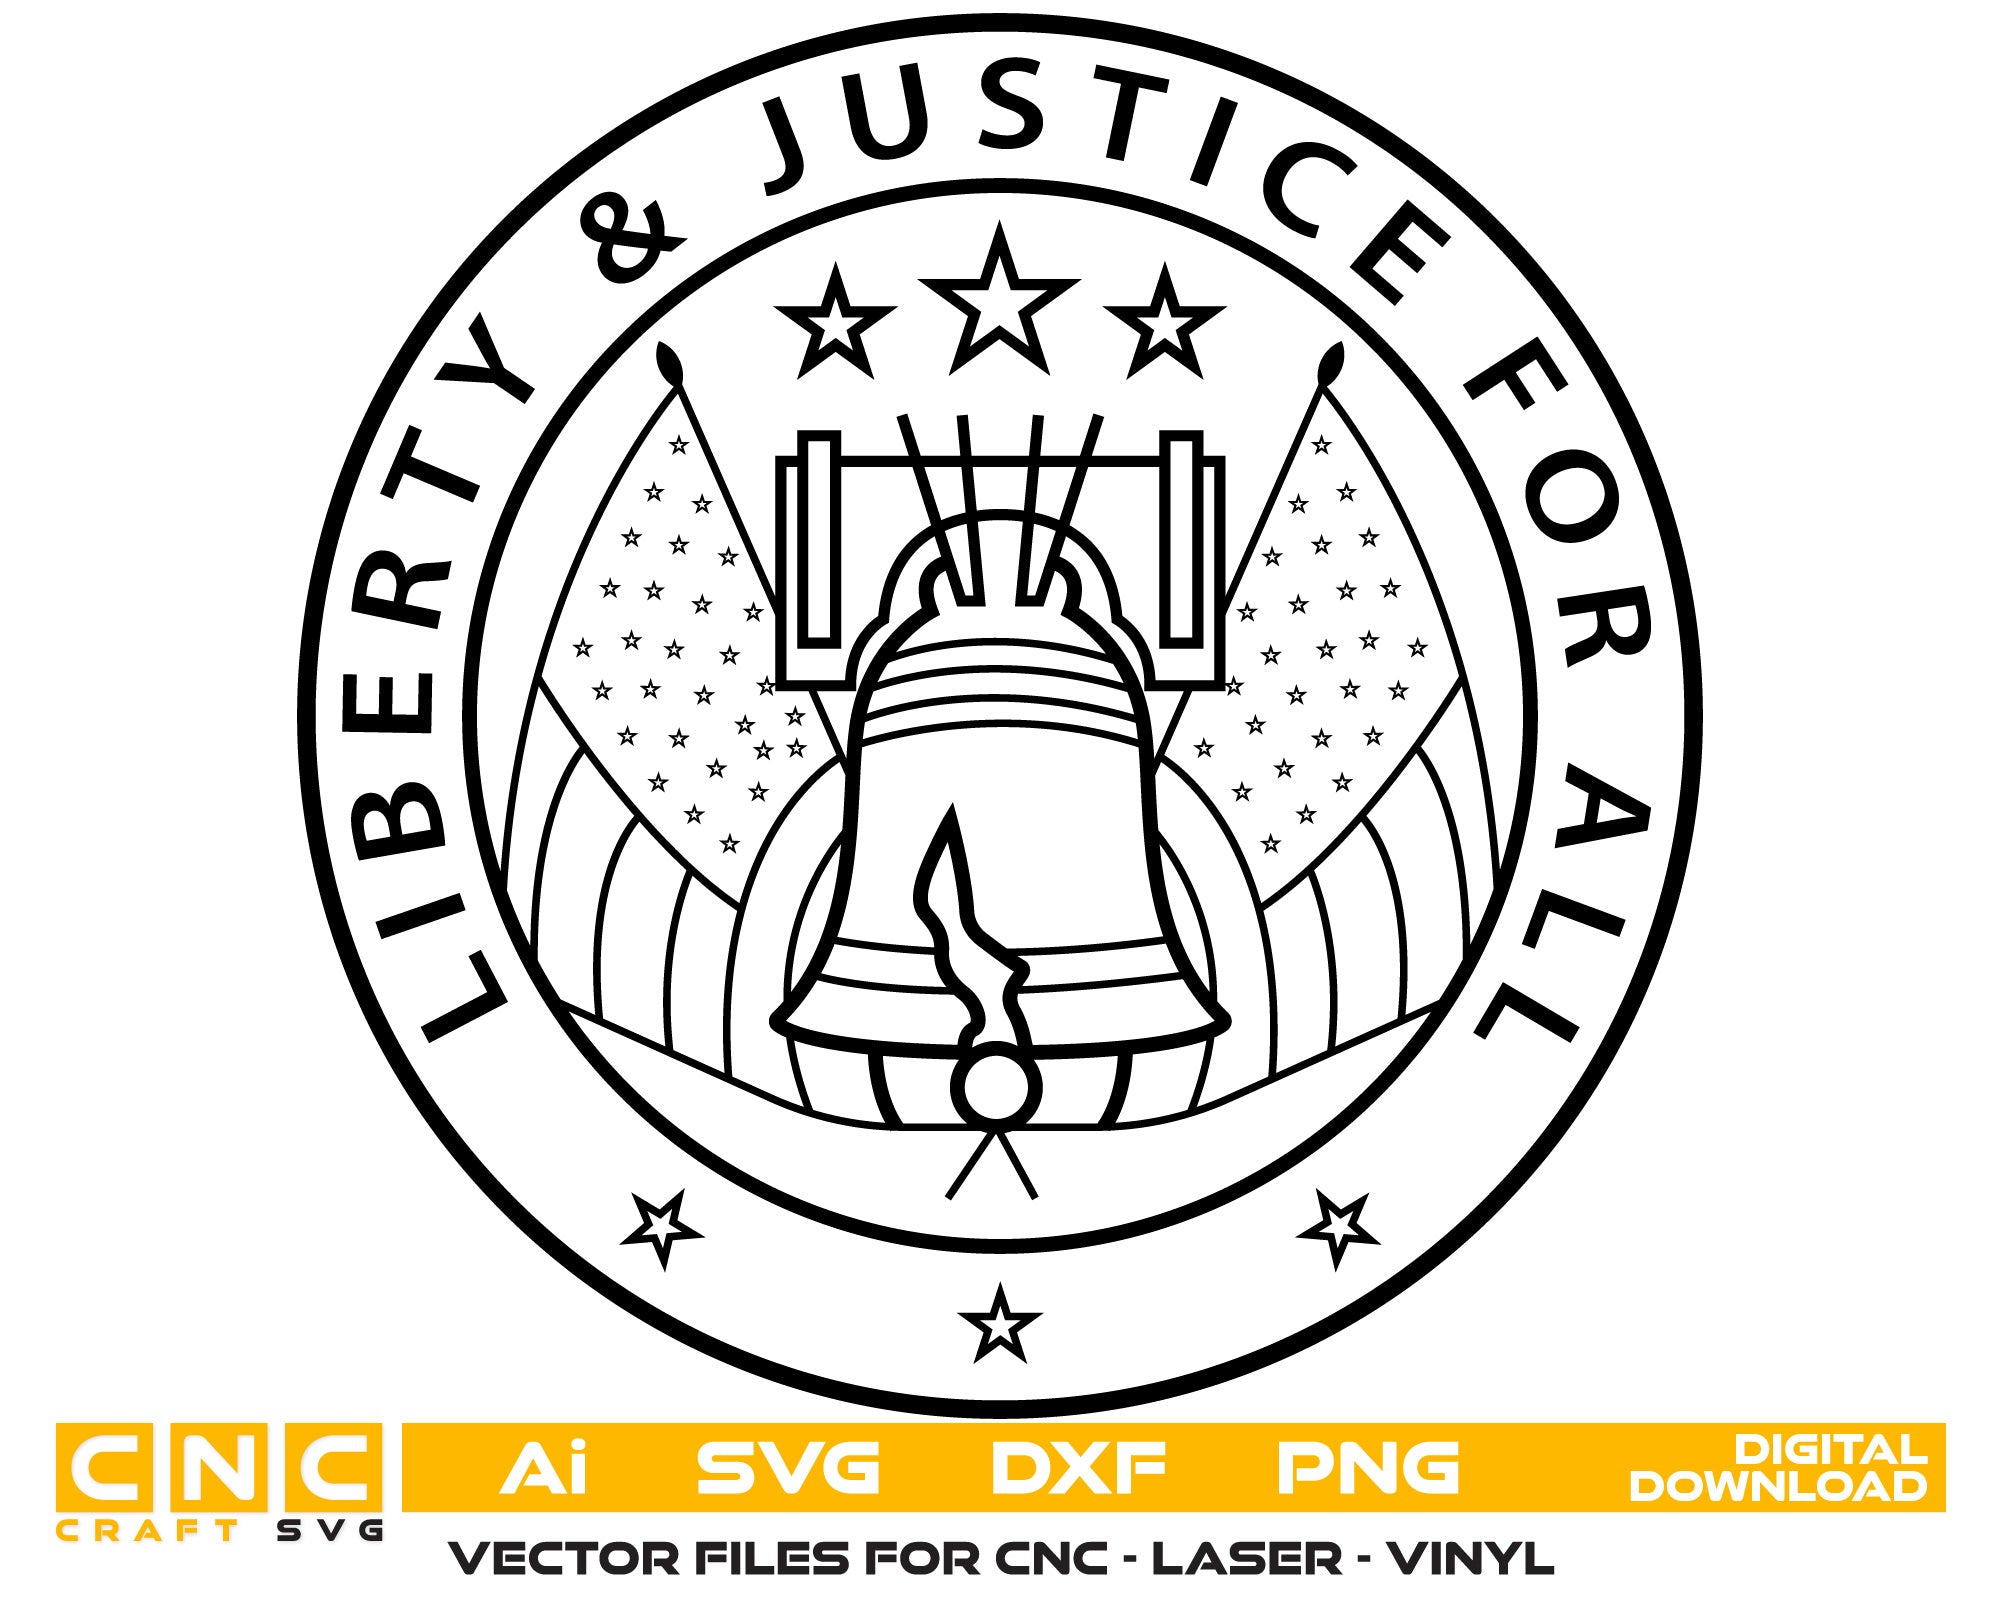 Liberty Justice for All Seal Vector Art, Ai,SVG, DXF, PNG, Digital Files